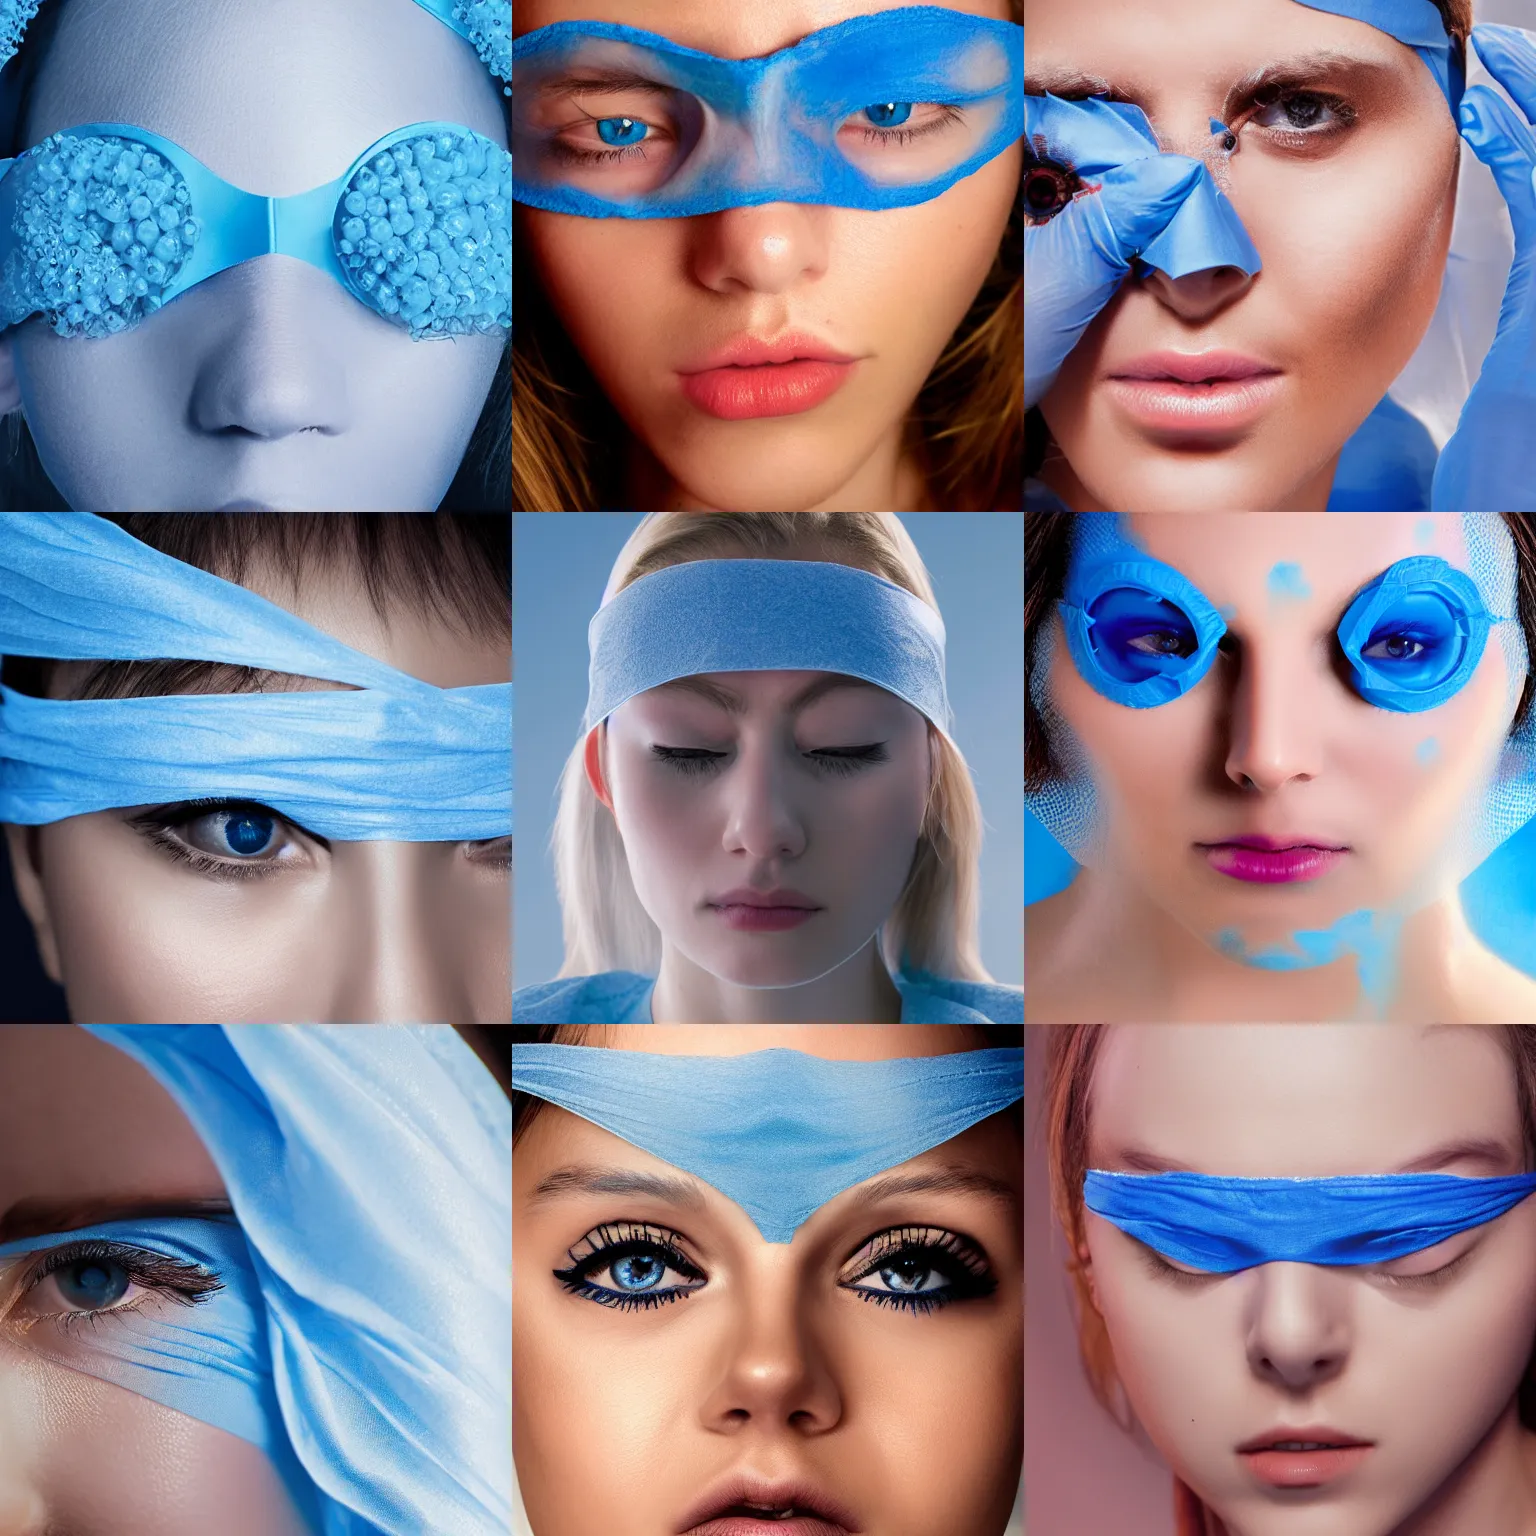 Prompt: beautiful extreme closeup portrait photo in style of frontiers in human blindfold molecular science fashion magazine blue gauze blindfold edition, highly detailed, soft lighting